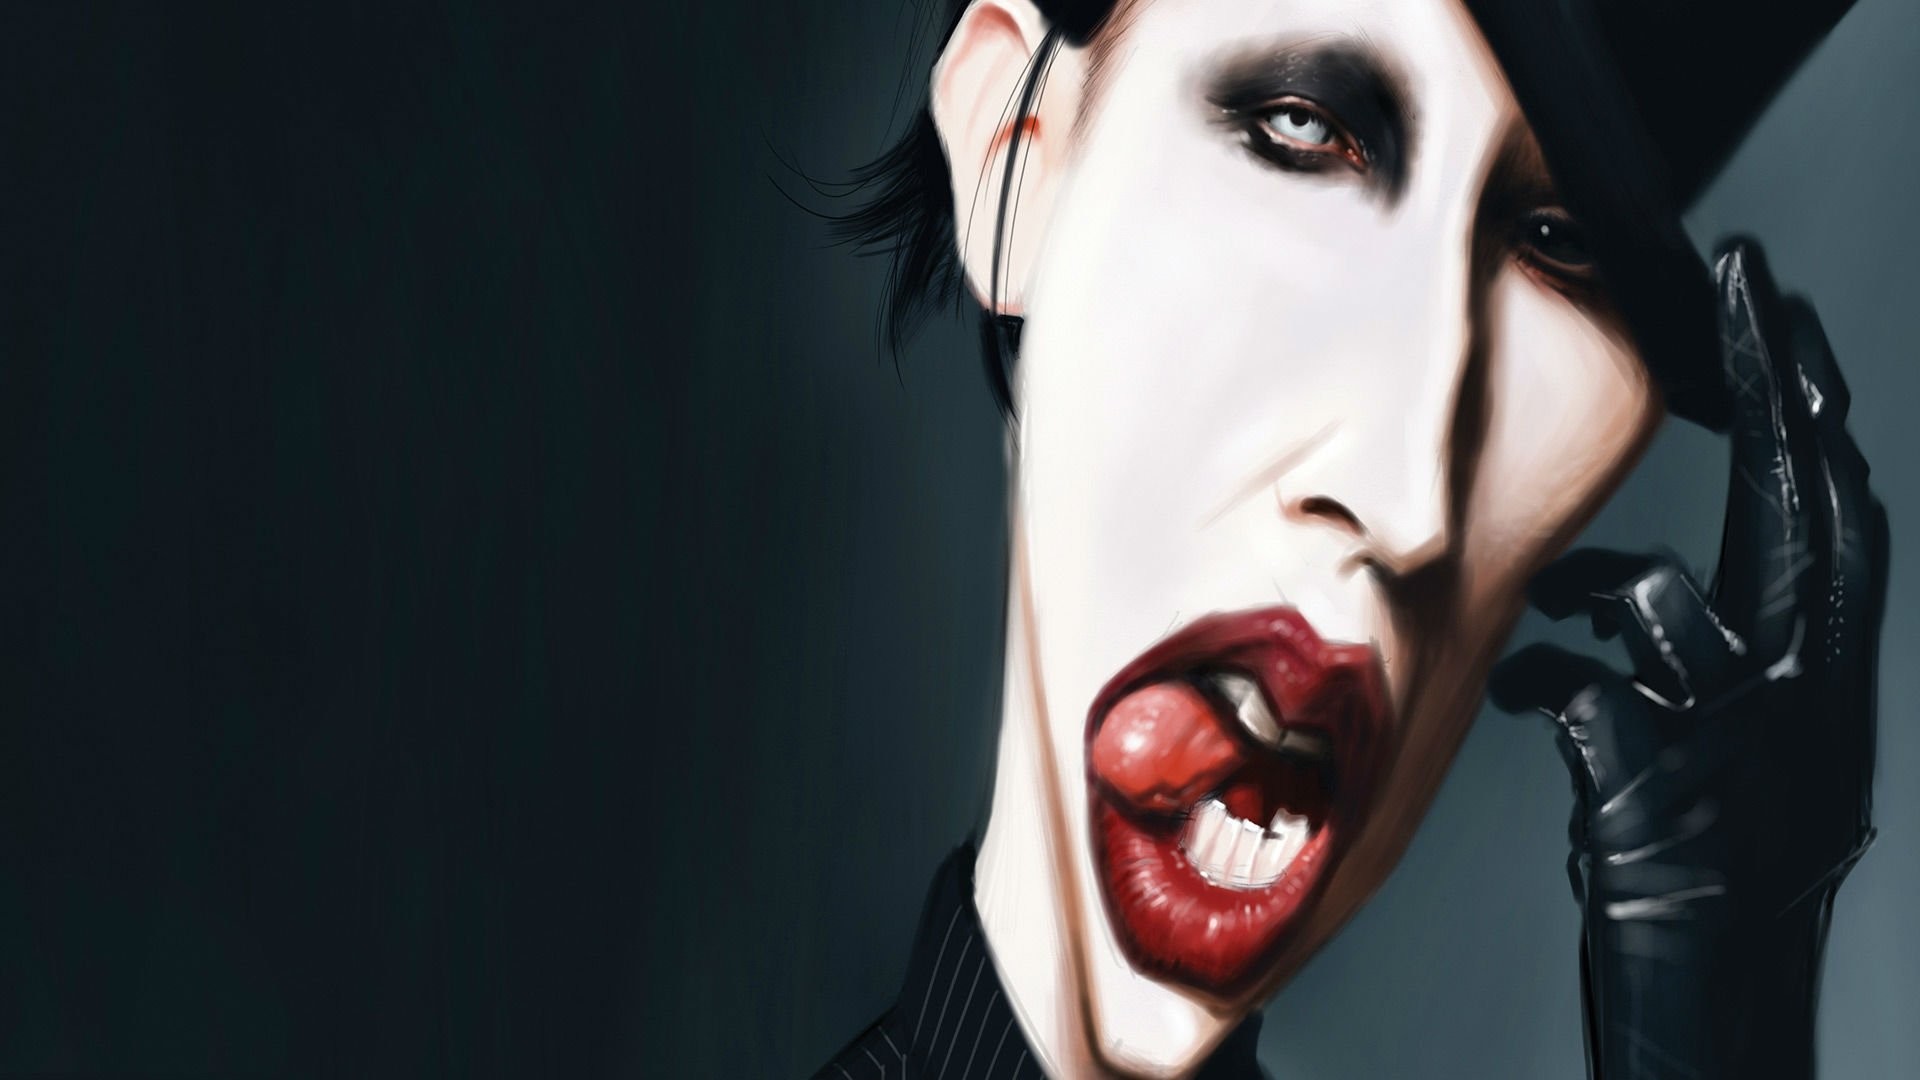 Marilyn manson Wallpapers HD Desktop and Mobile Backgrounds